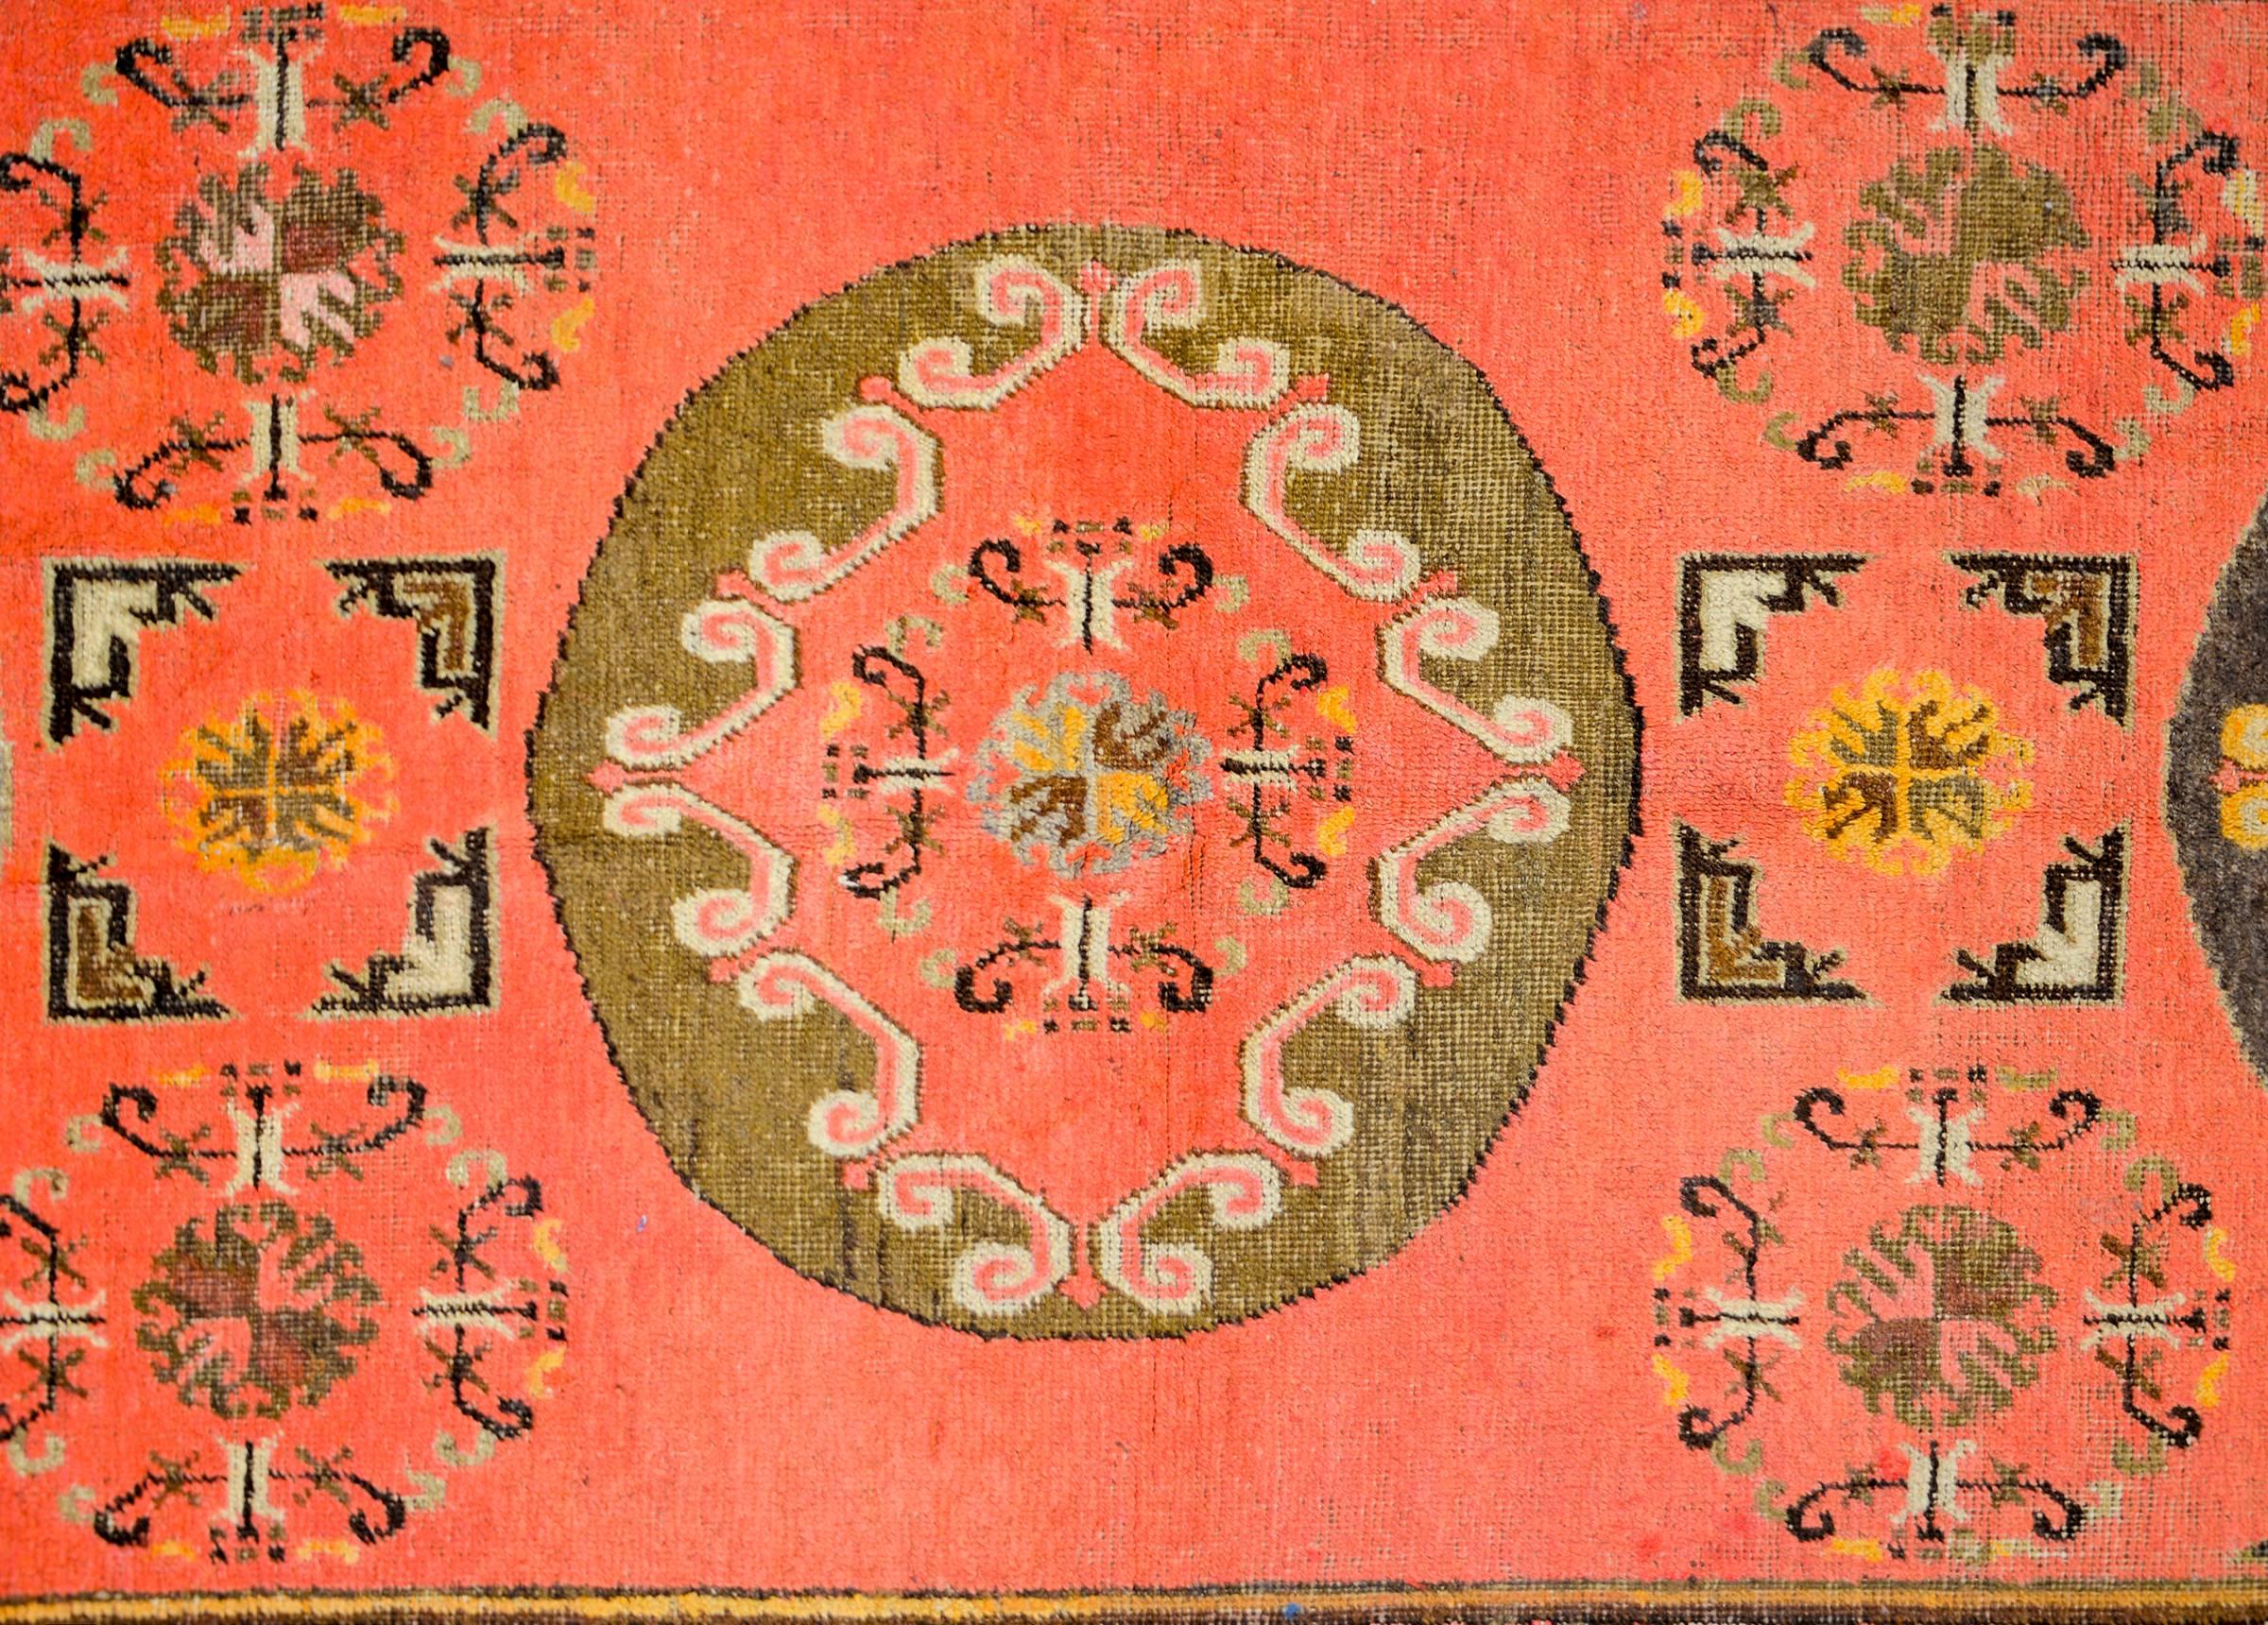 A wonderful early 20th century Central Asian Khotan rug with a three large round medallions amidst a field of smaller floral medallions, on a coral colored background. The border is composed of two patterned stripes. The inner stripe is a geometric